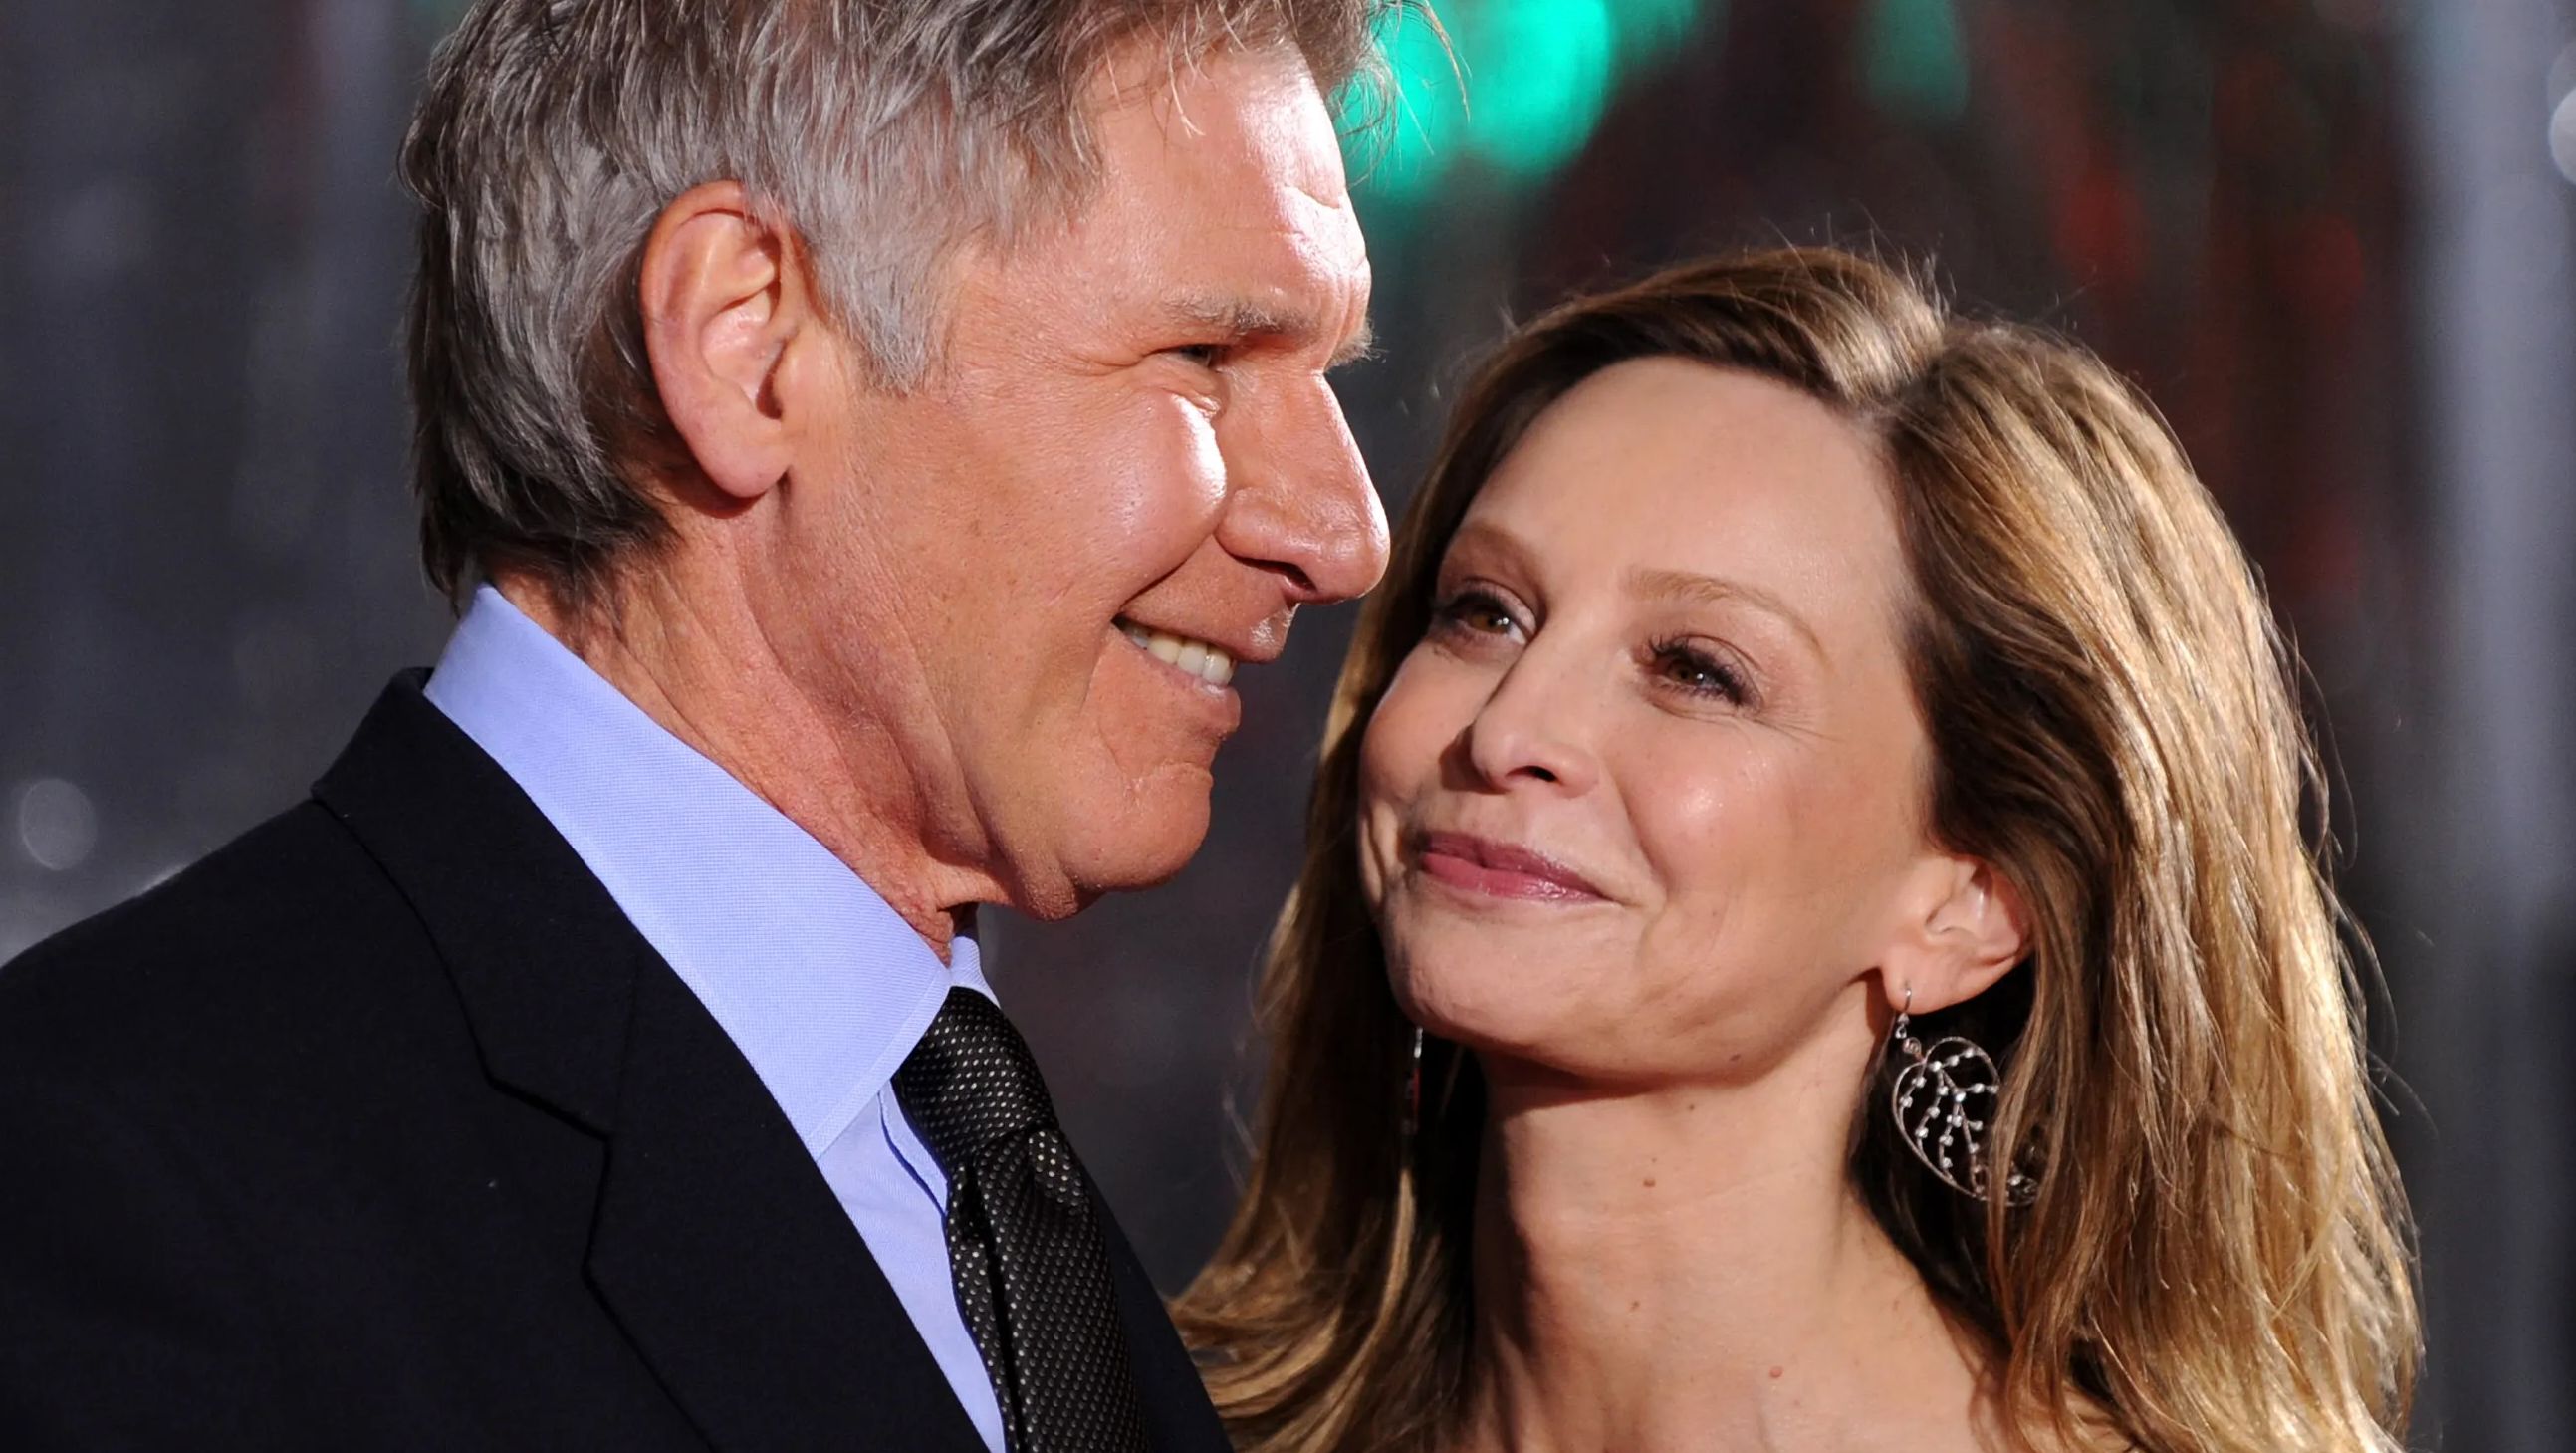 Harrison Ford and Calista Flockhart close up